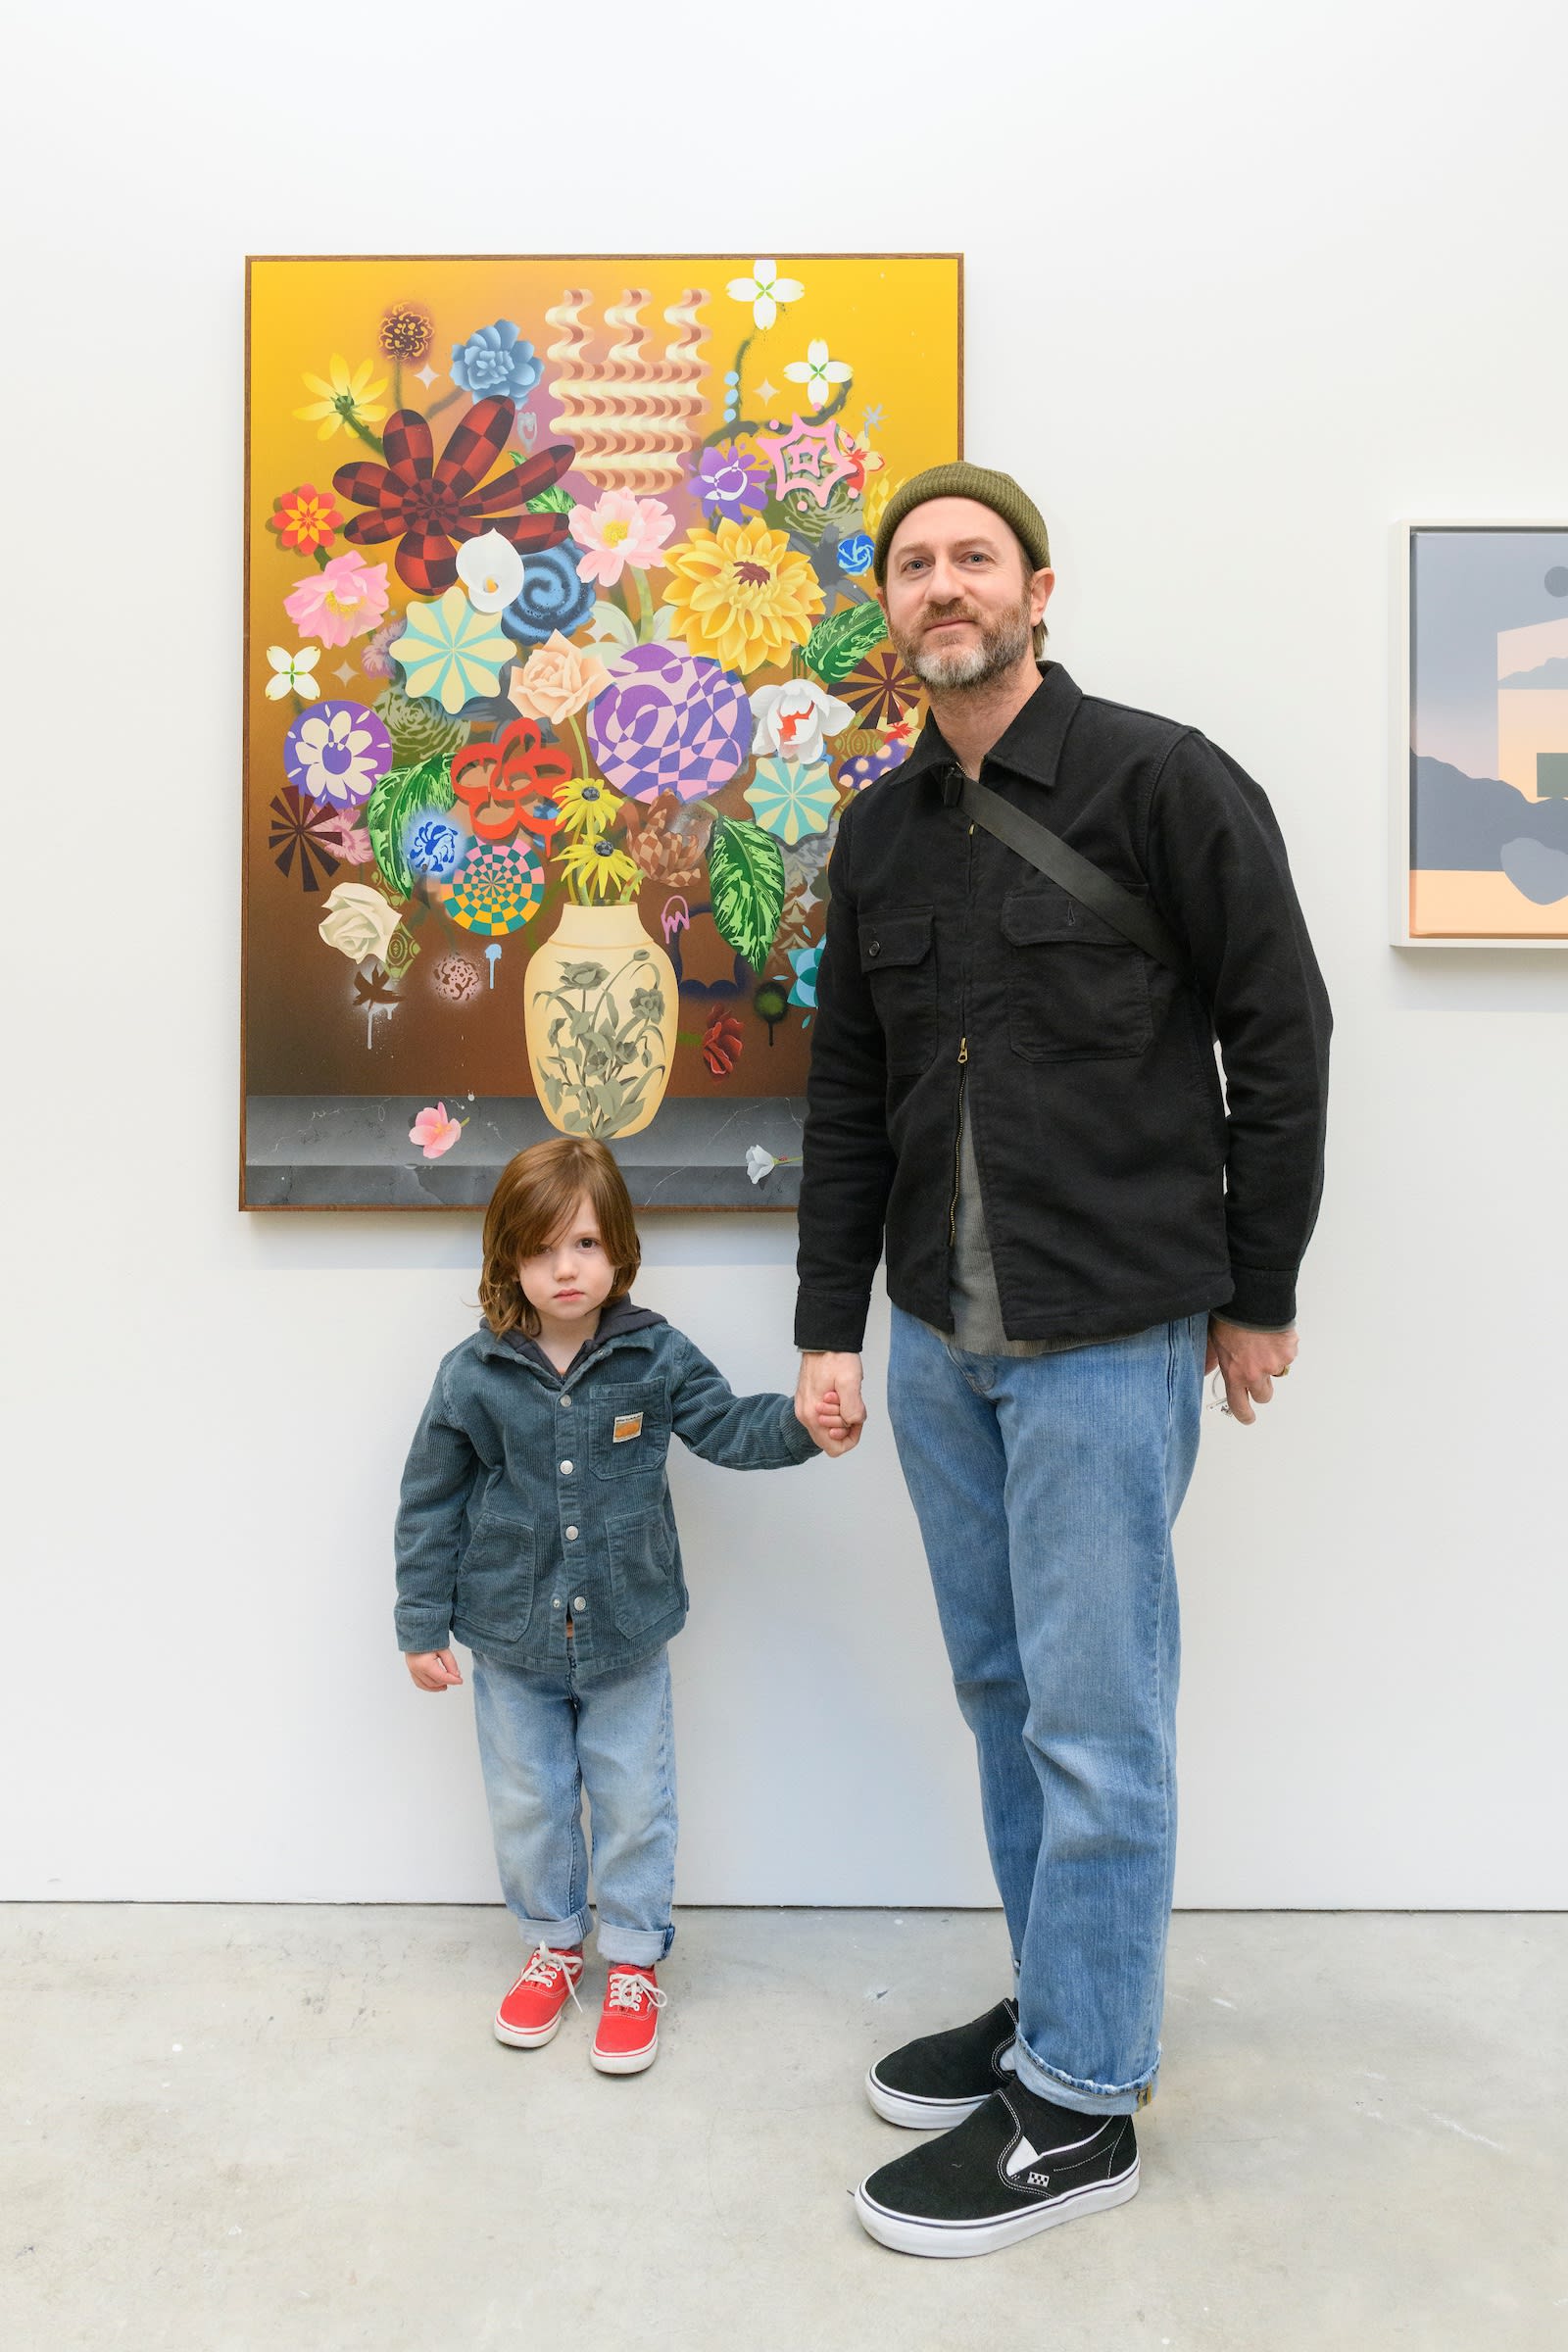 Artist Casey Gray taking a photo of his son infront of his piece at Hashimoto San Francisco 